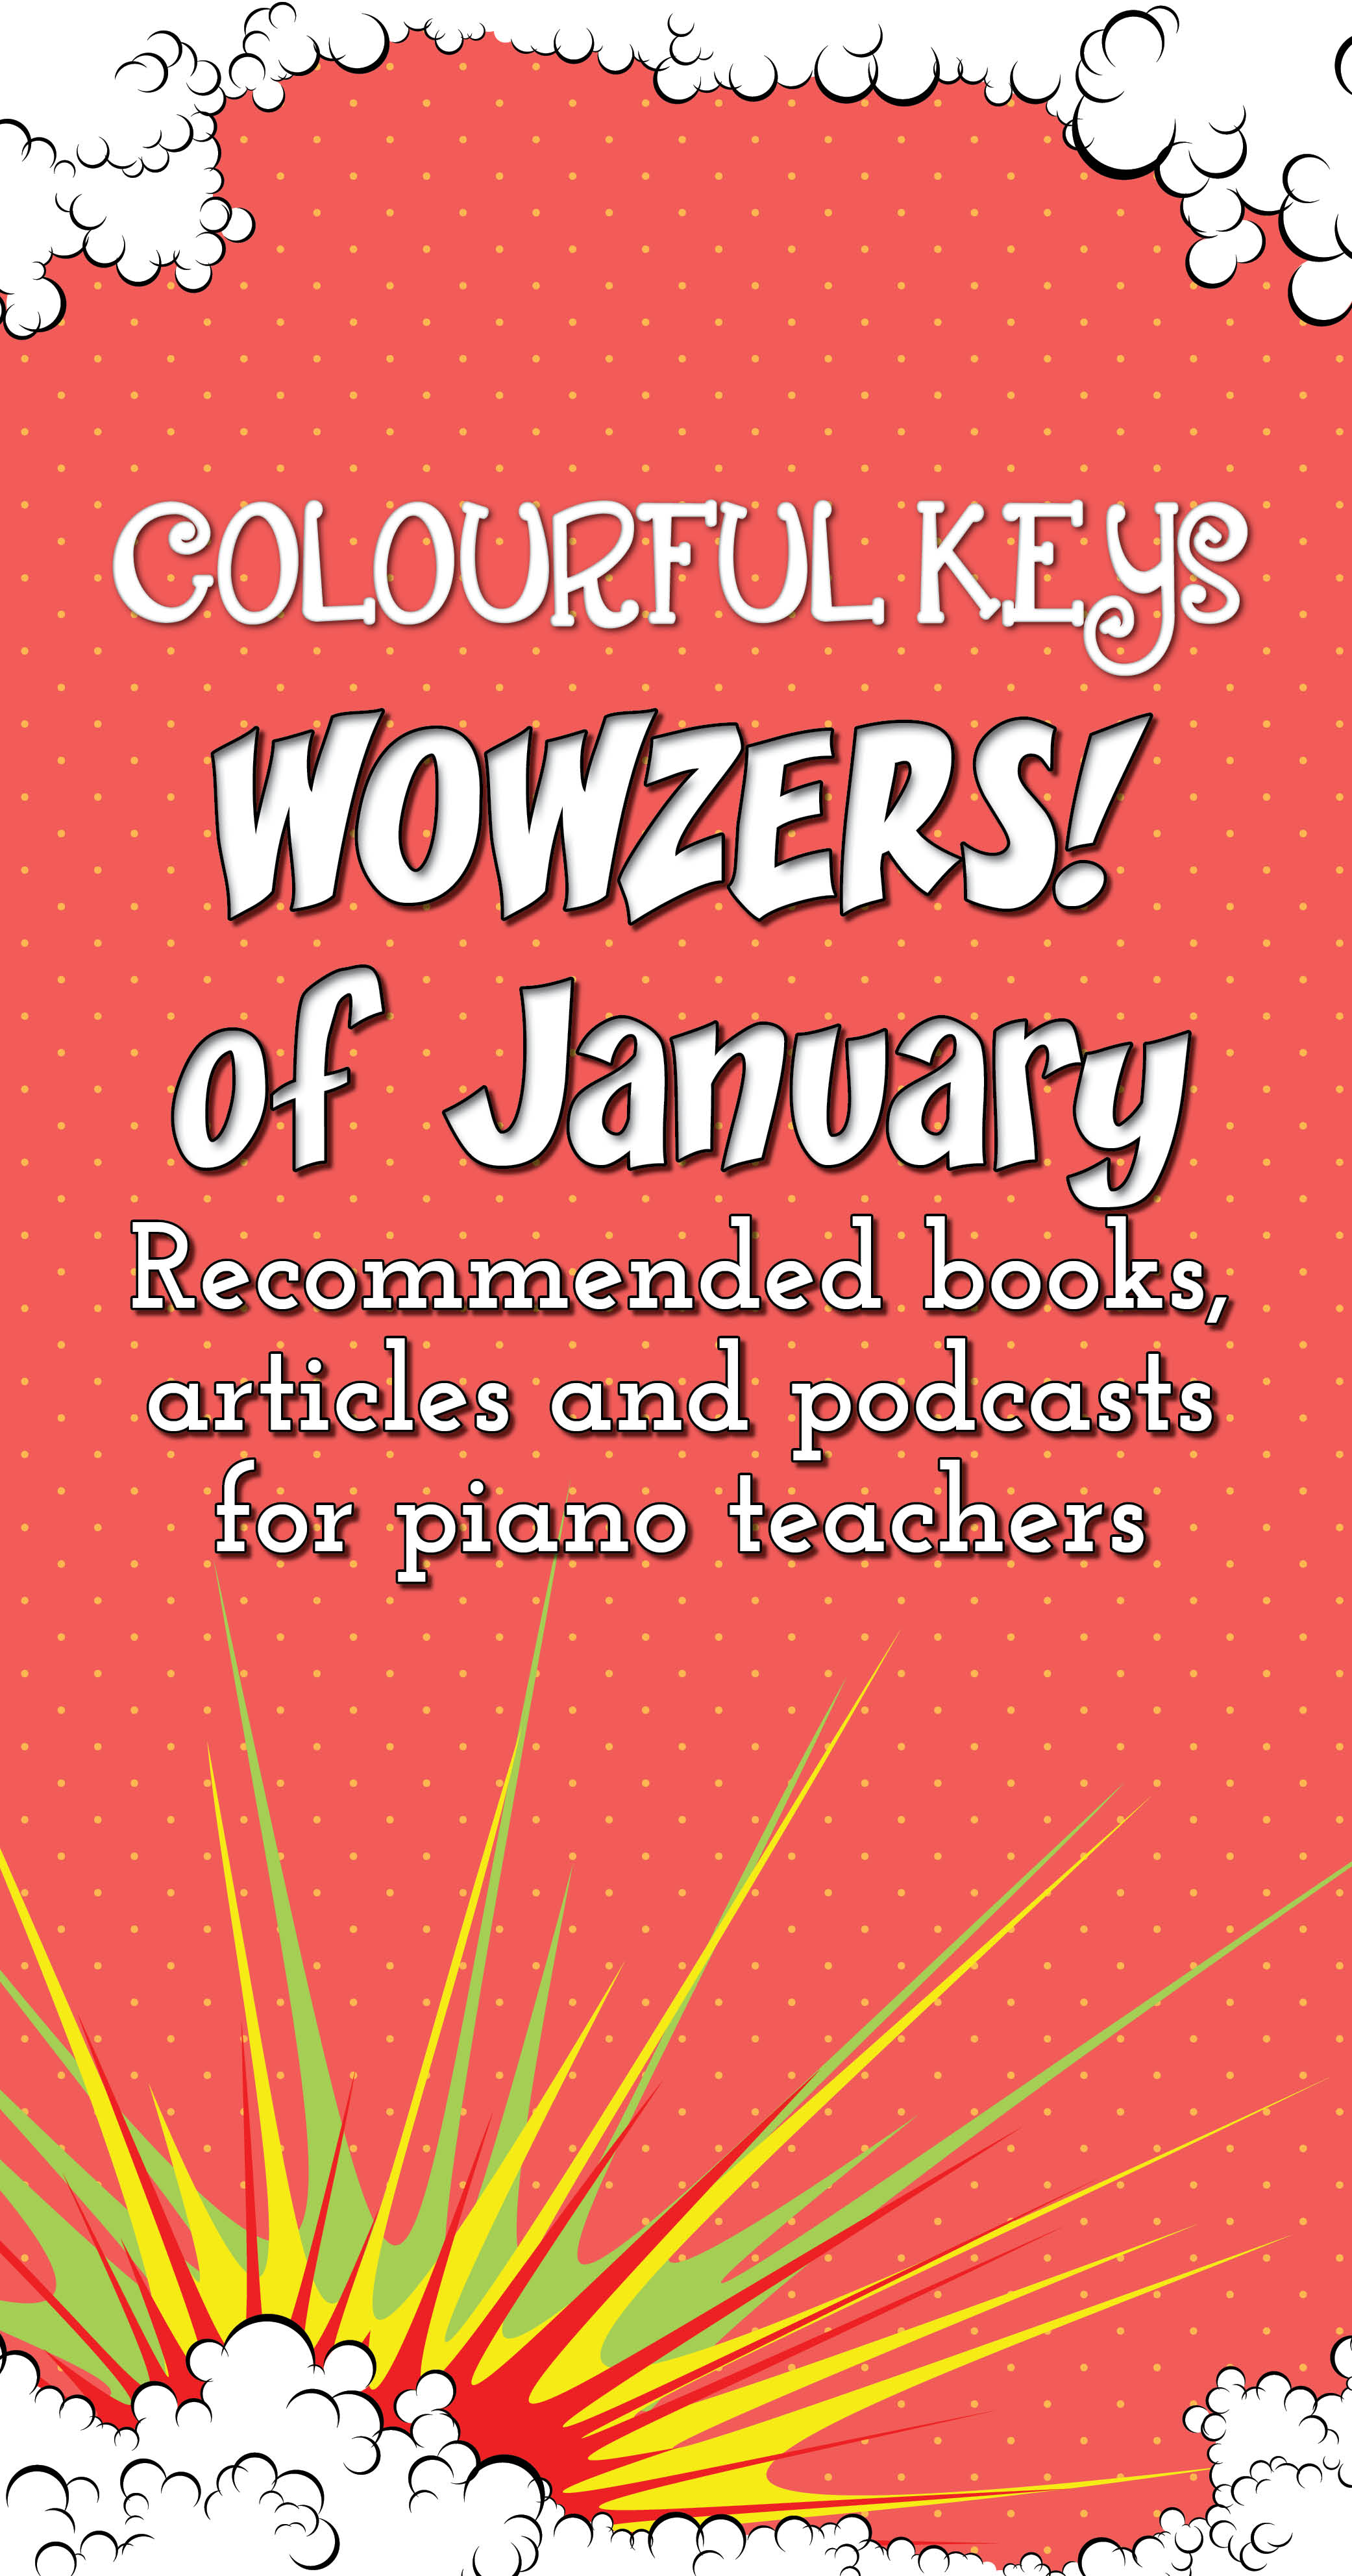 Top resources for piano teachers this month